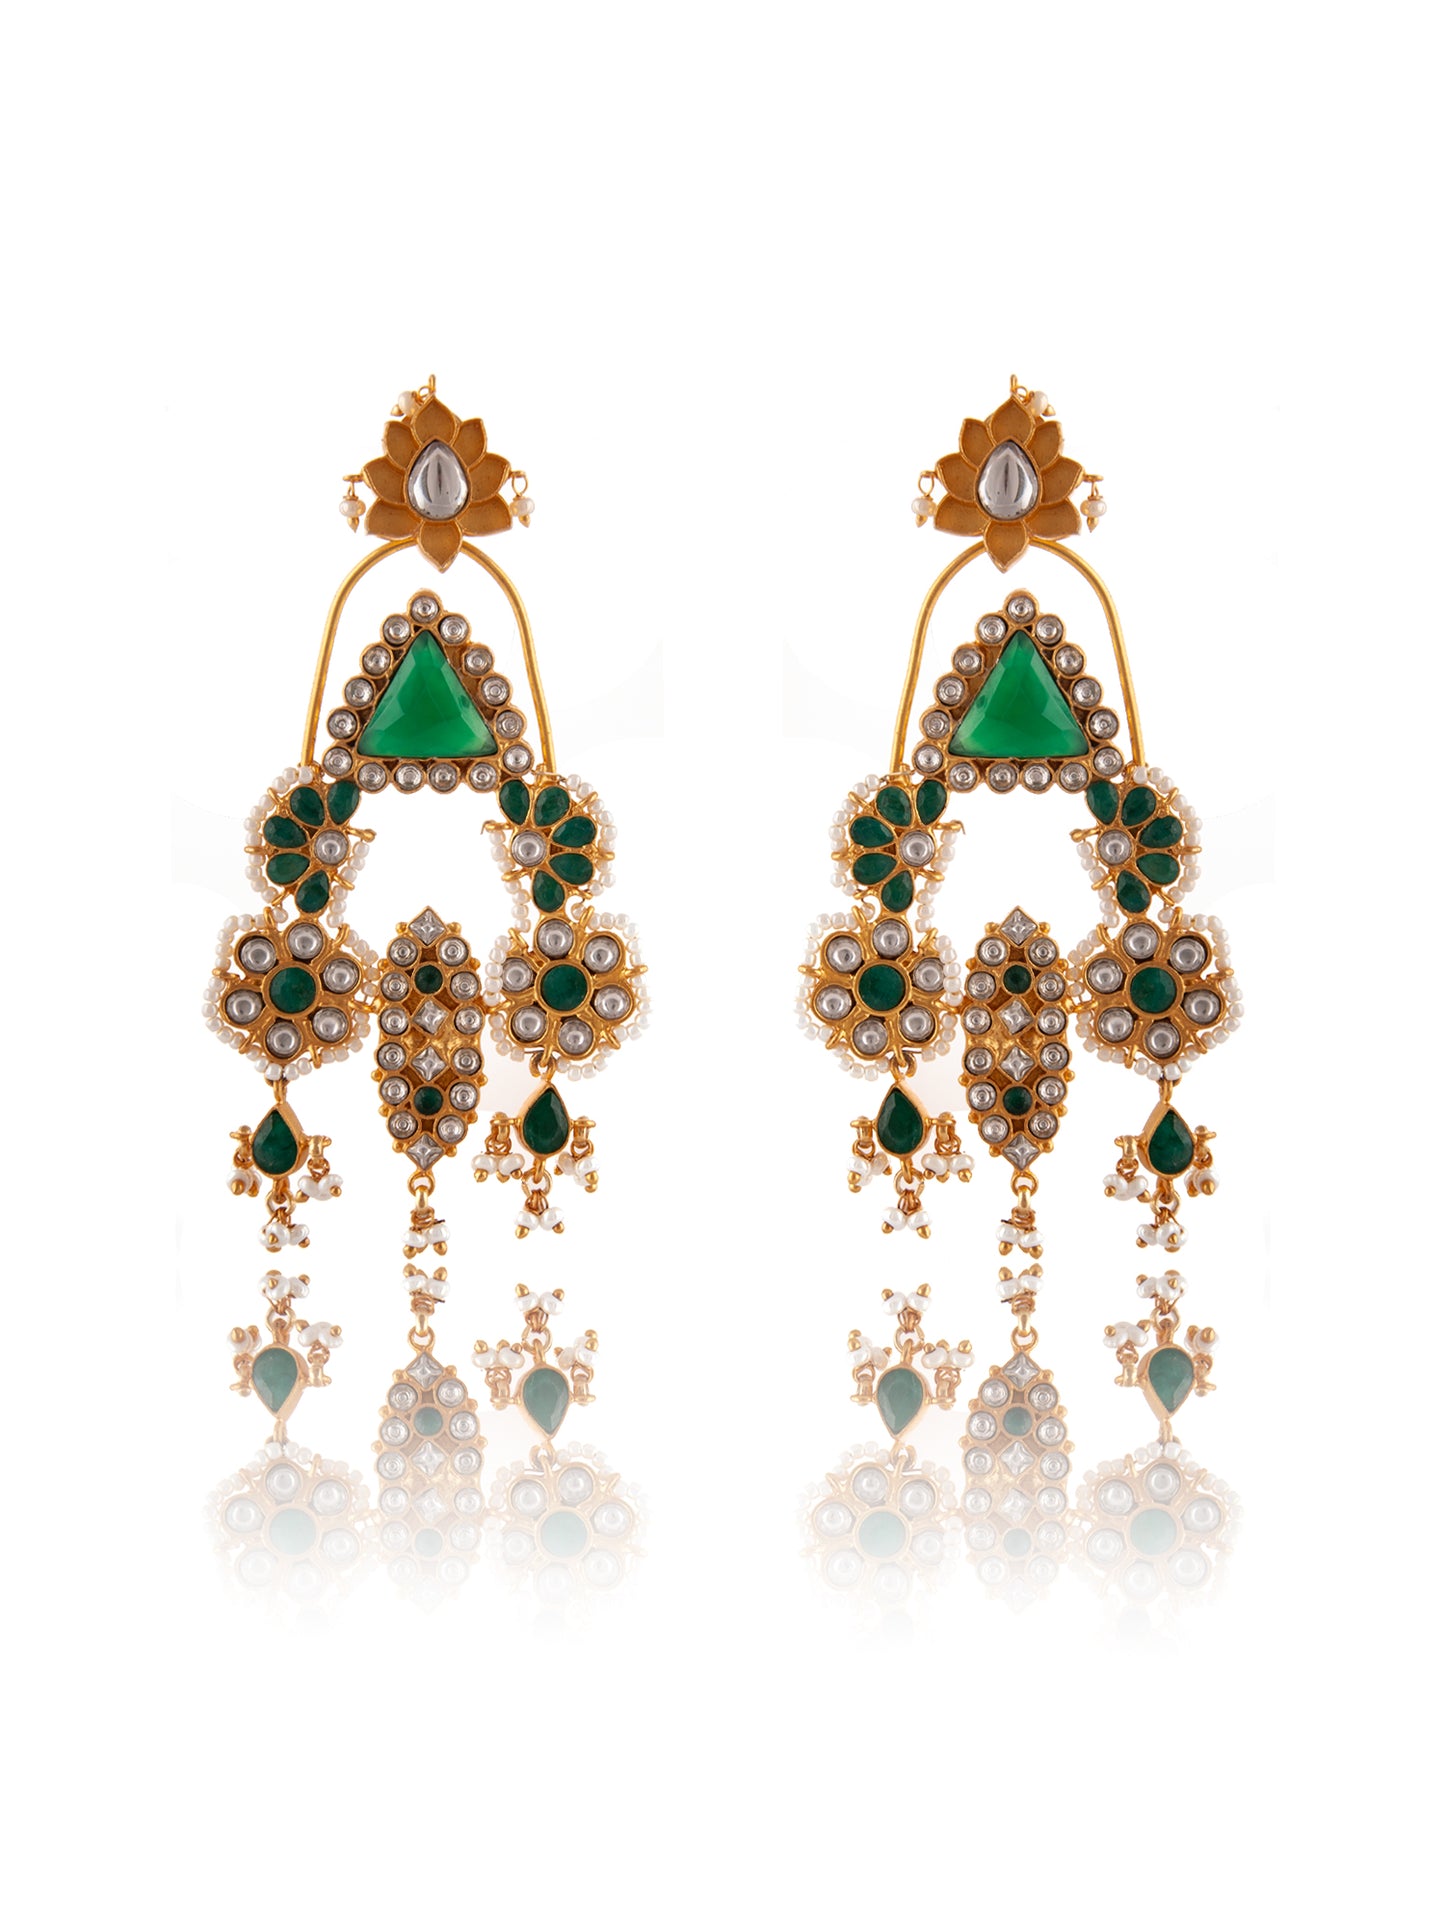 925 Sterling Silver 22K Gold Plated Green Onyx Danglers Earrings With Pearl And White Kundan